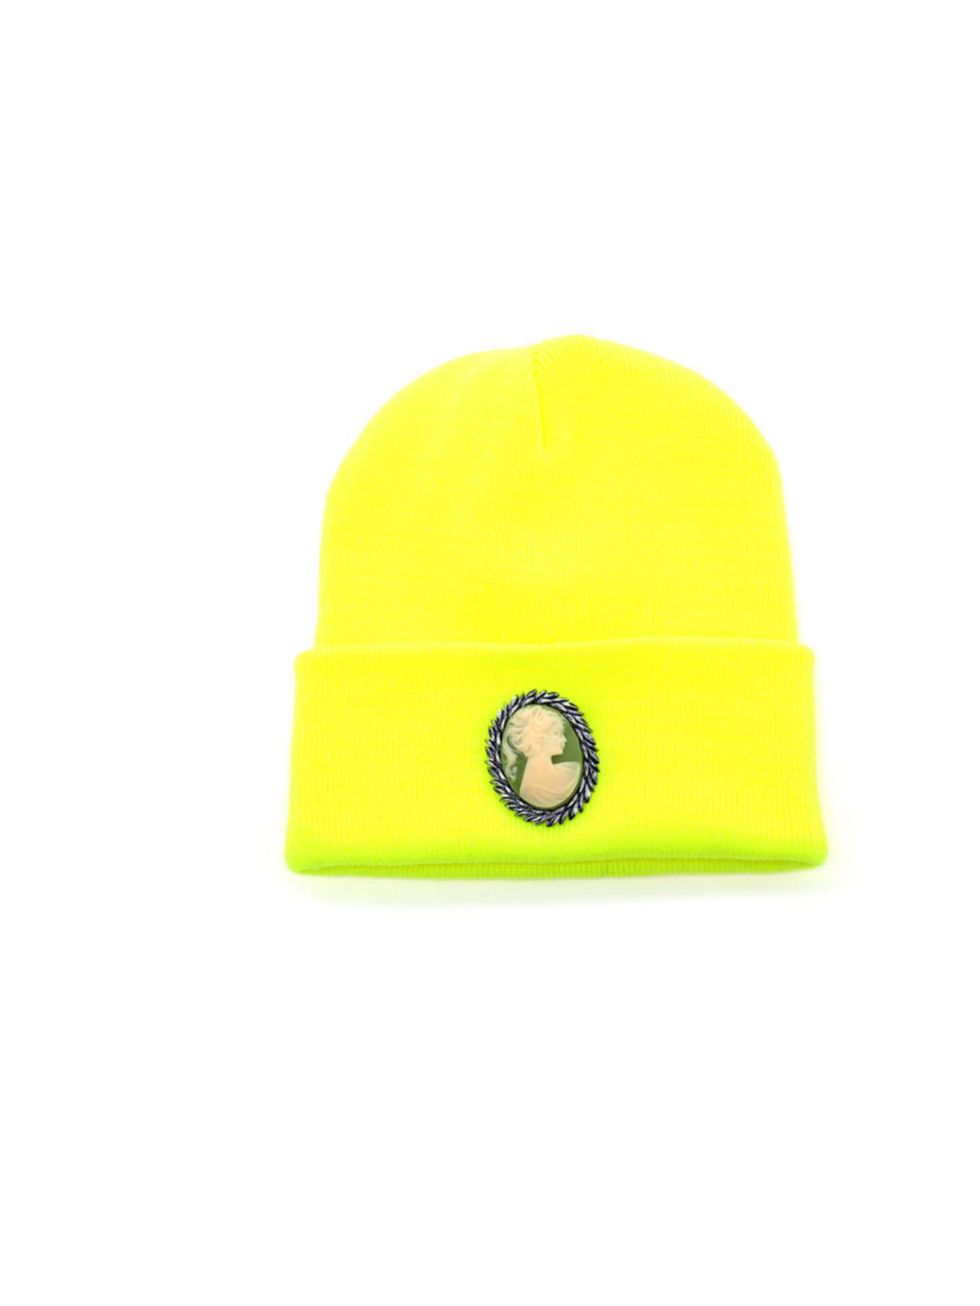 <p>Neon beanie with a vintage cameo? We shouldnt but we so would Silver Spoon Attire beanie hat, £45, at <a href="http://www.brownsfashion.com/Product/Whats_New/Clothing/Whats_New_for_Women/Cameo_Beanie_Hat/product.aspx?p=4851249&amp;cl=4&amp;pc=1949737